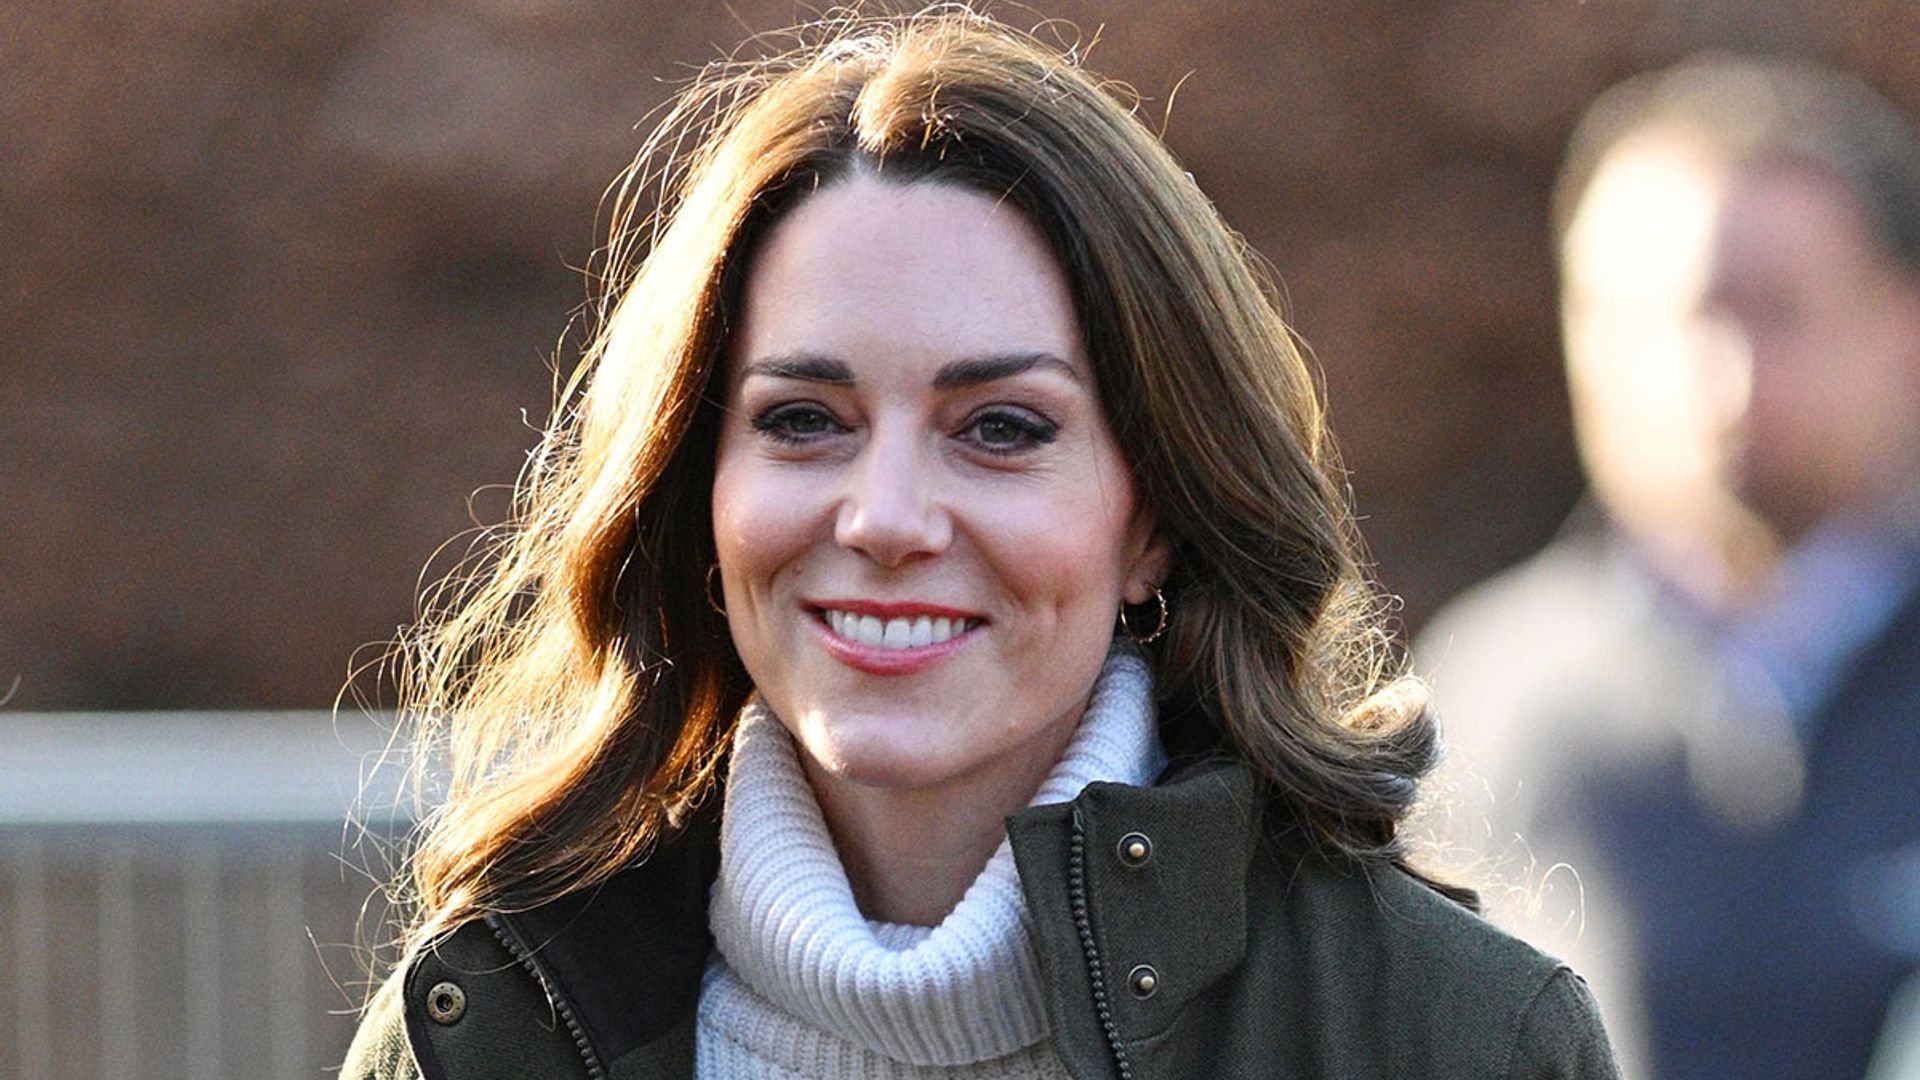 kate middleton new outfit denmark barbour jacket